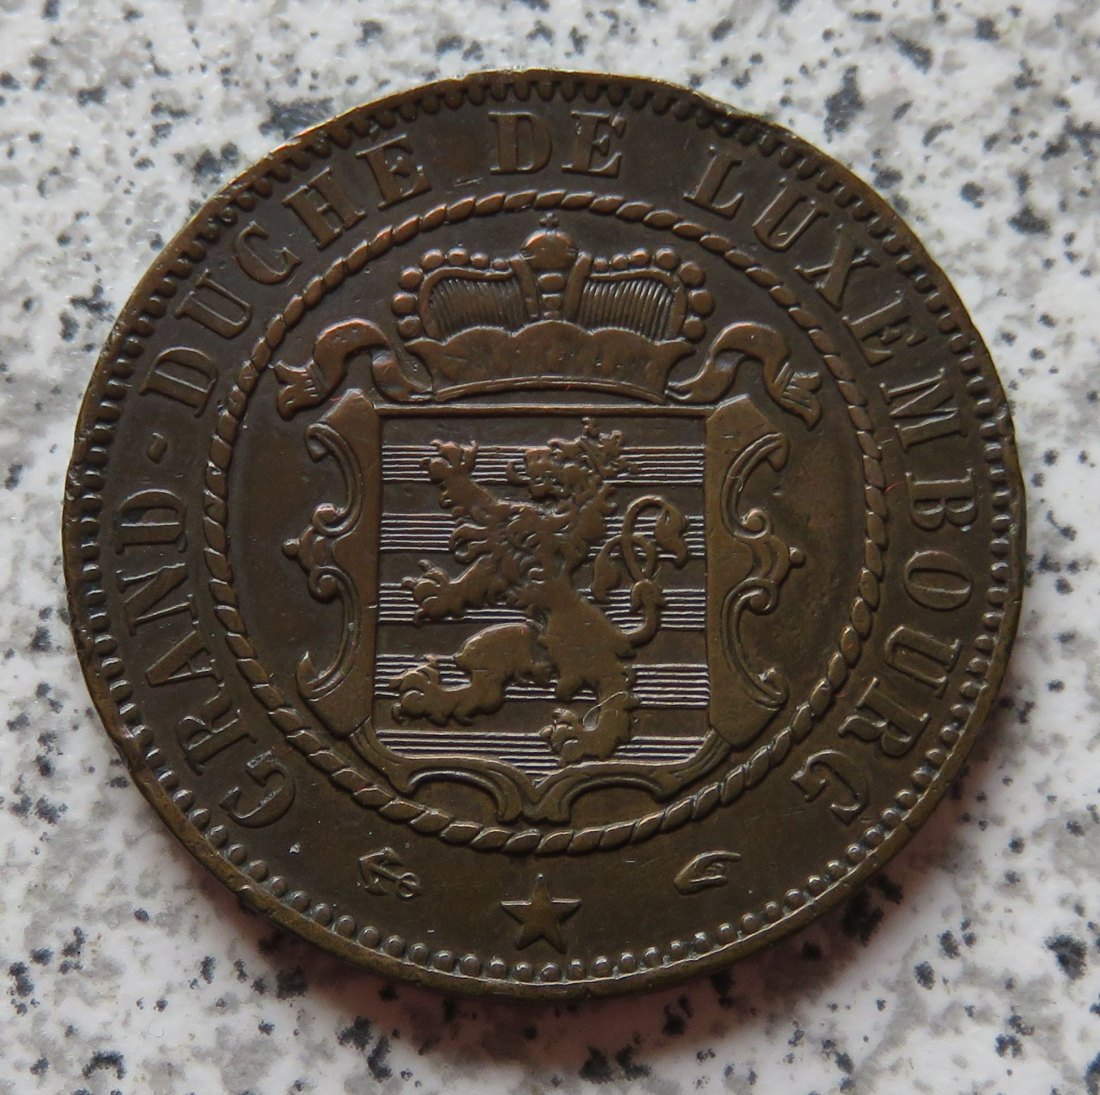  Luxemburg 10 Centimes 1855 A   